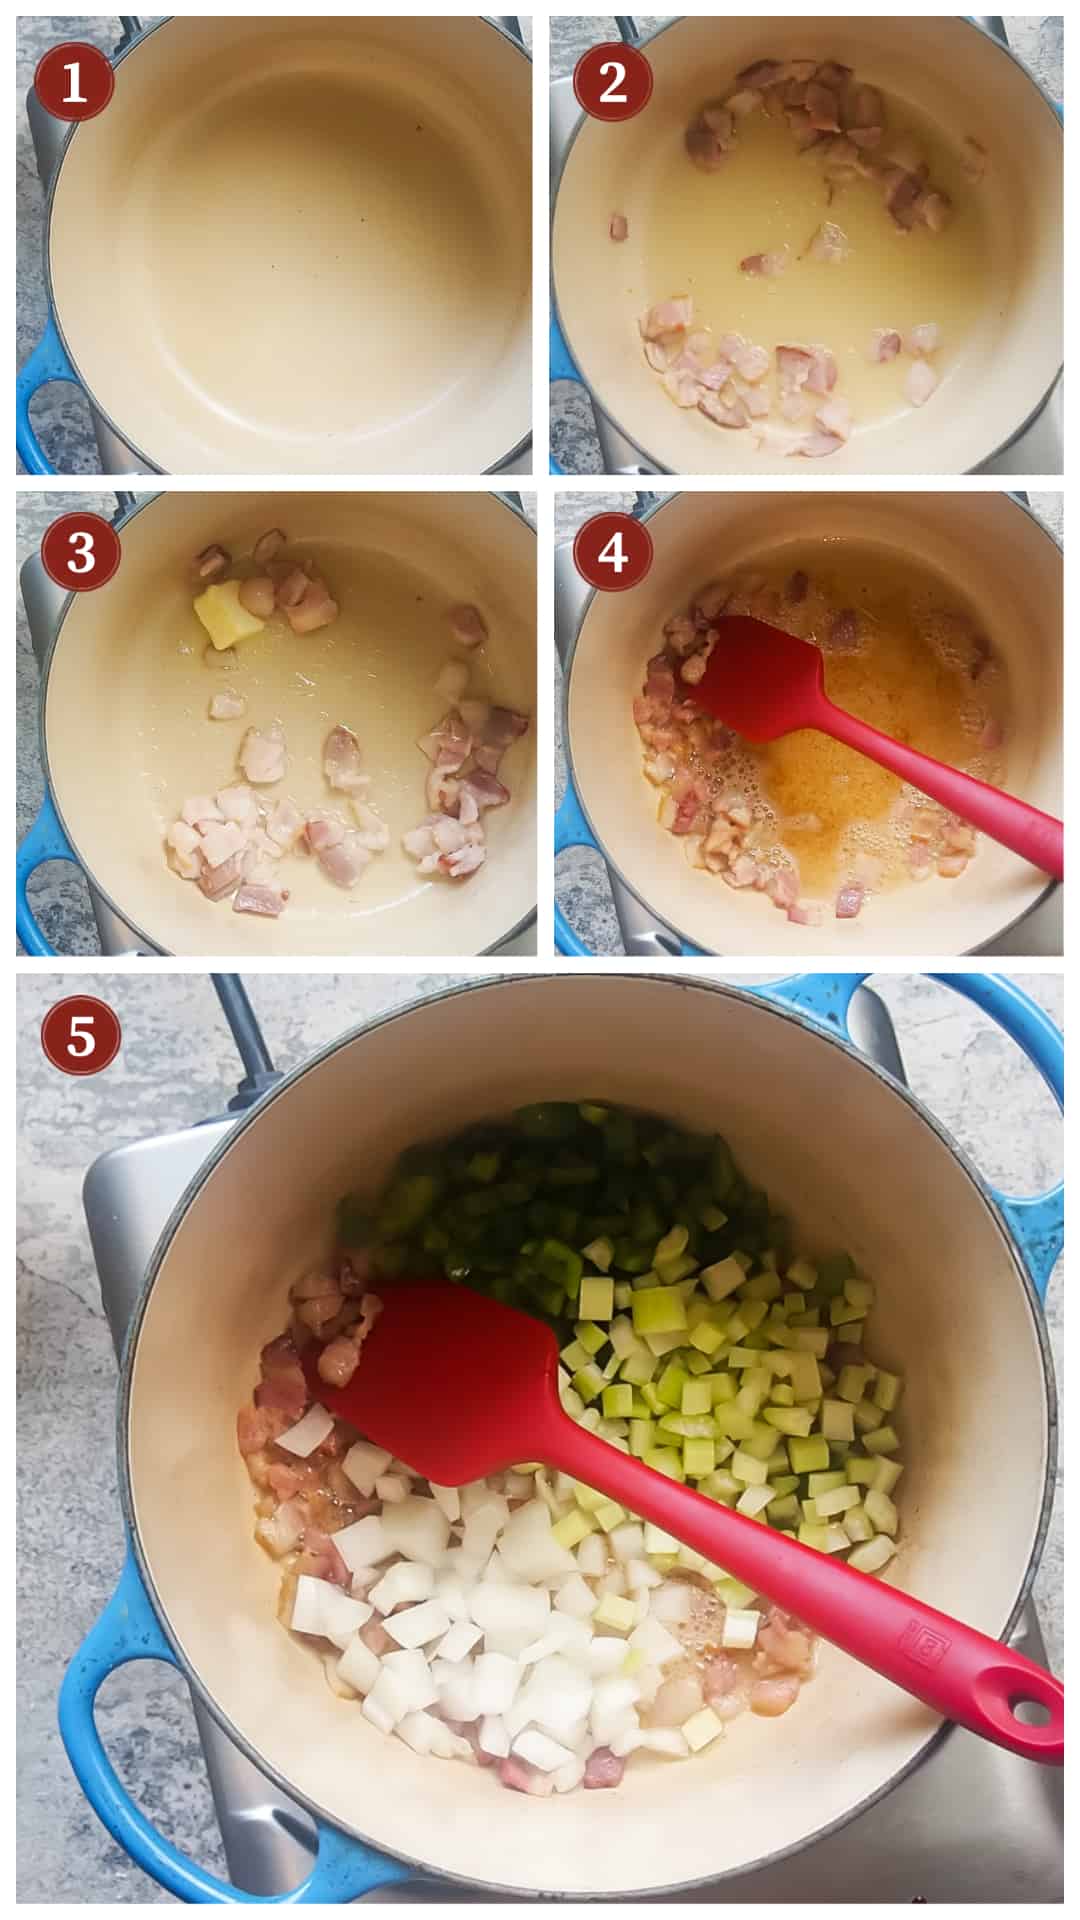 a collage of images showing the process of making crawfish etouffee, steps 1 - 5